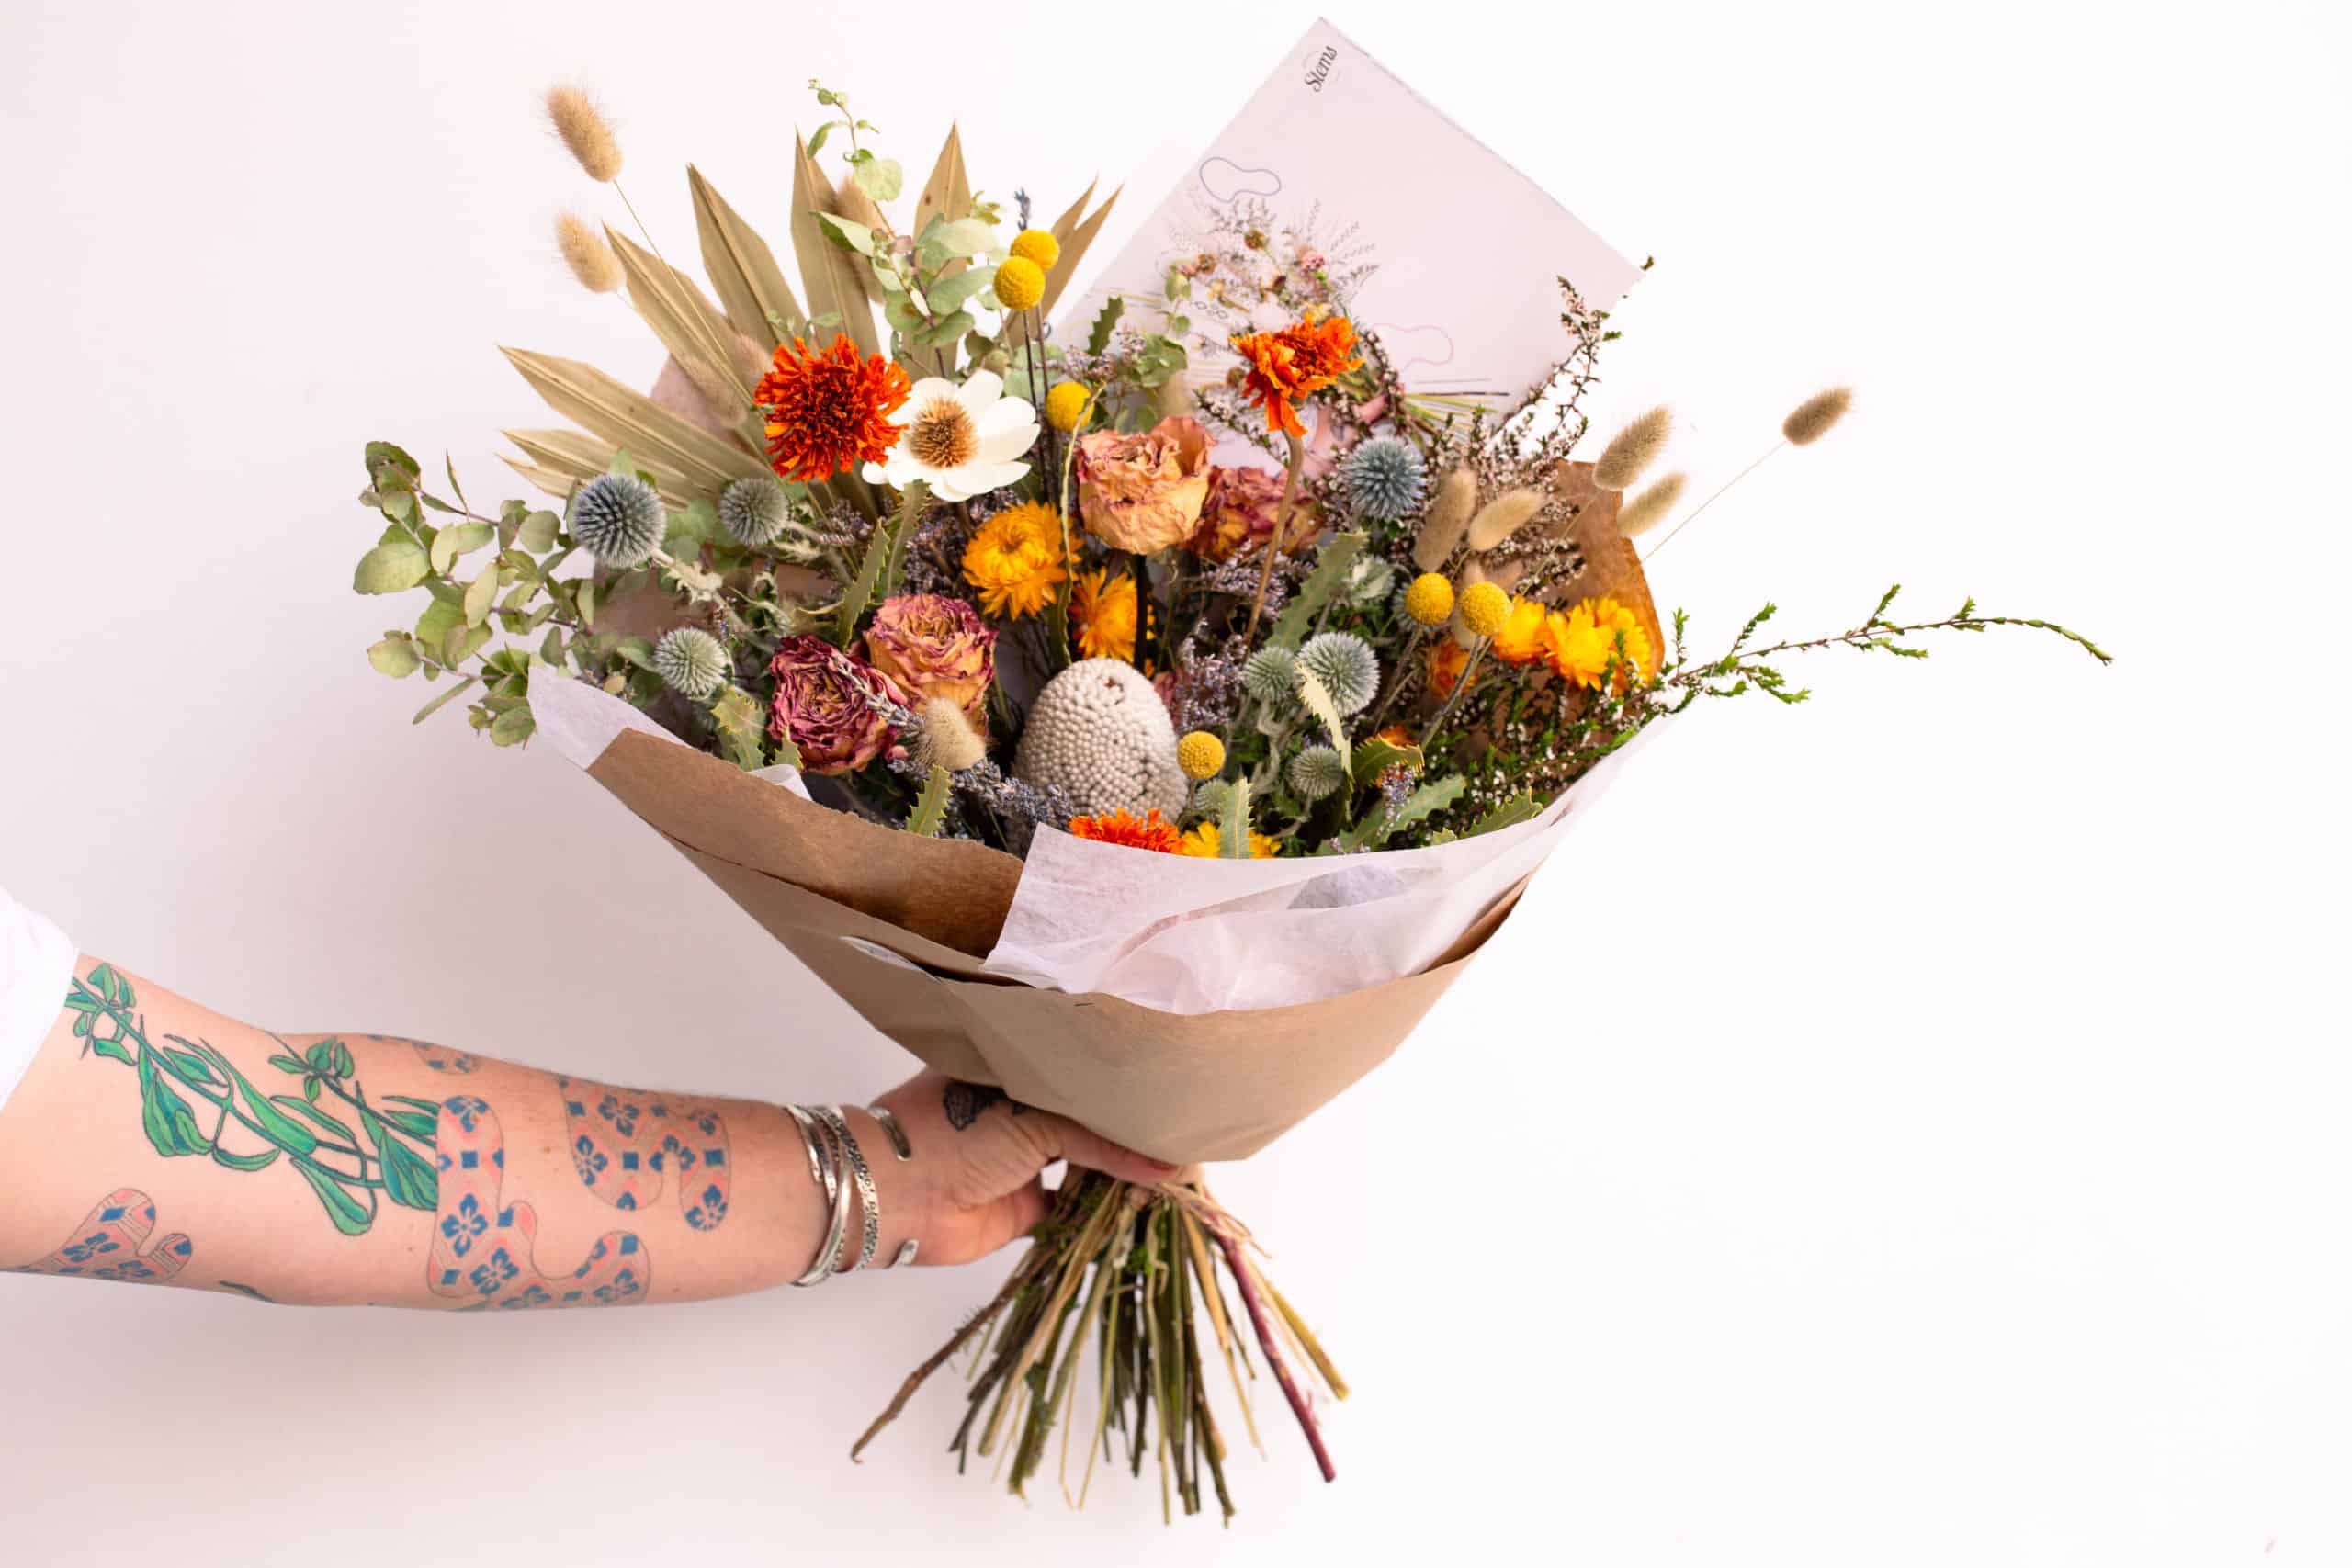 The Dried Bouquets